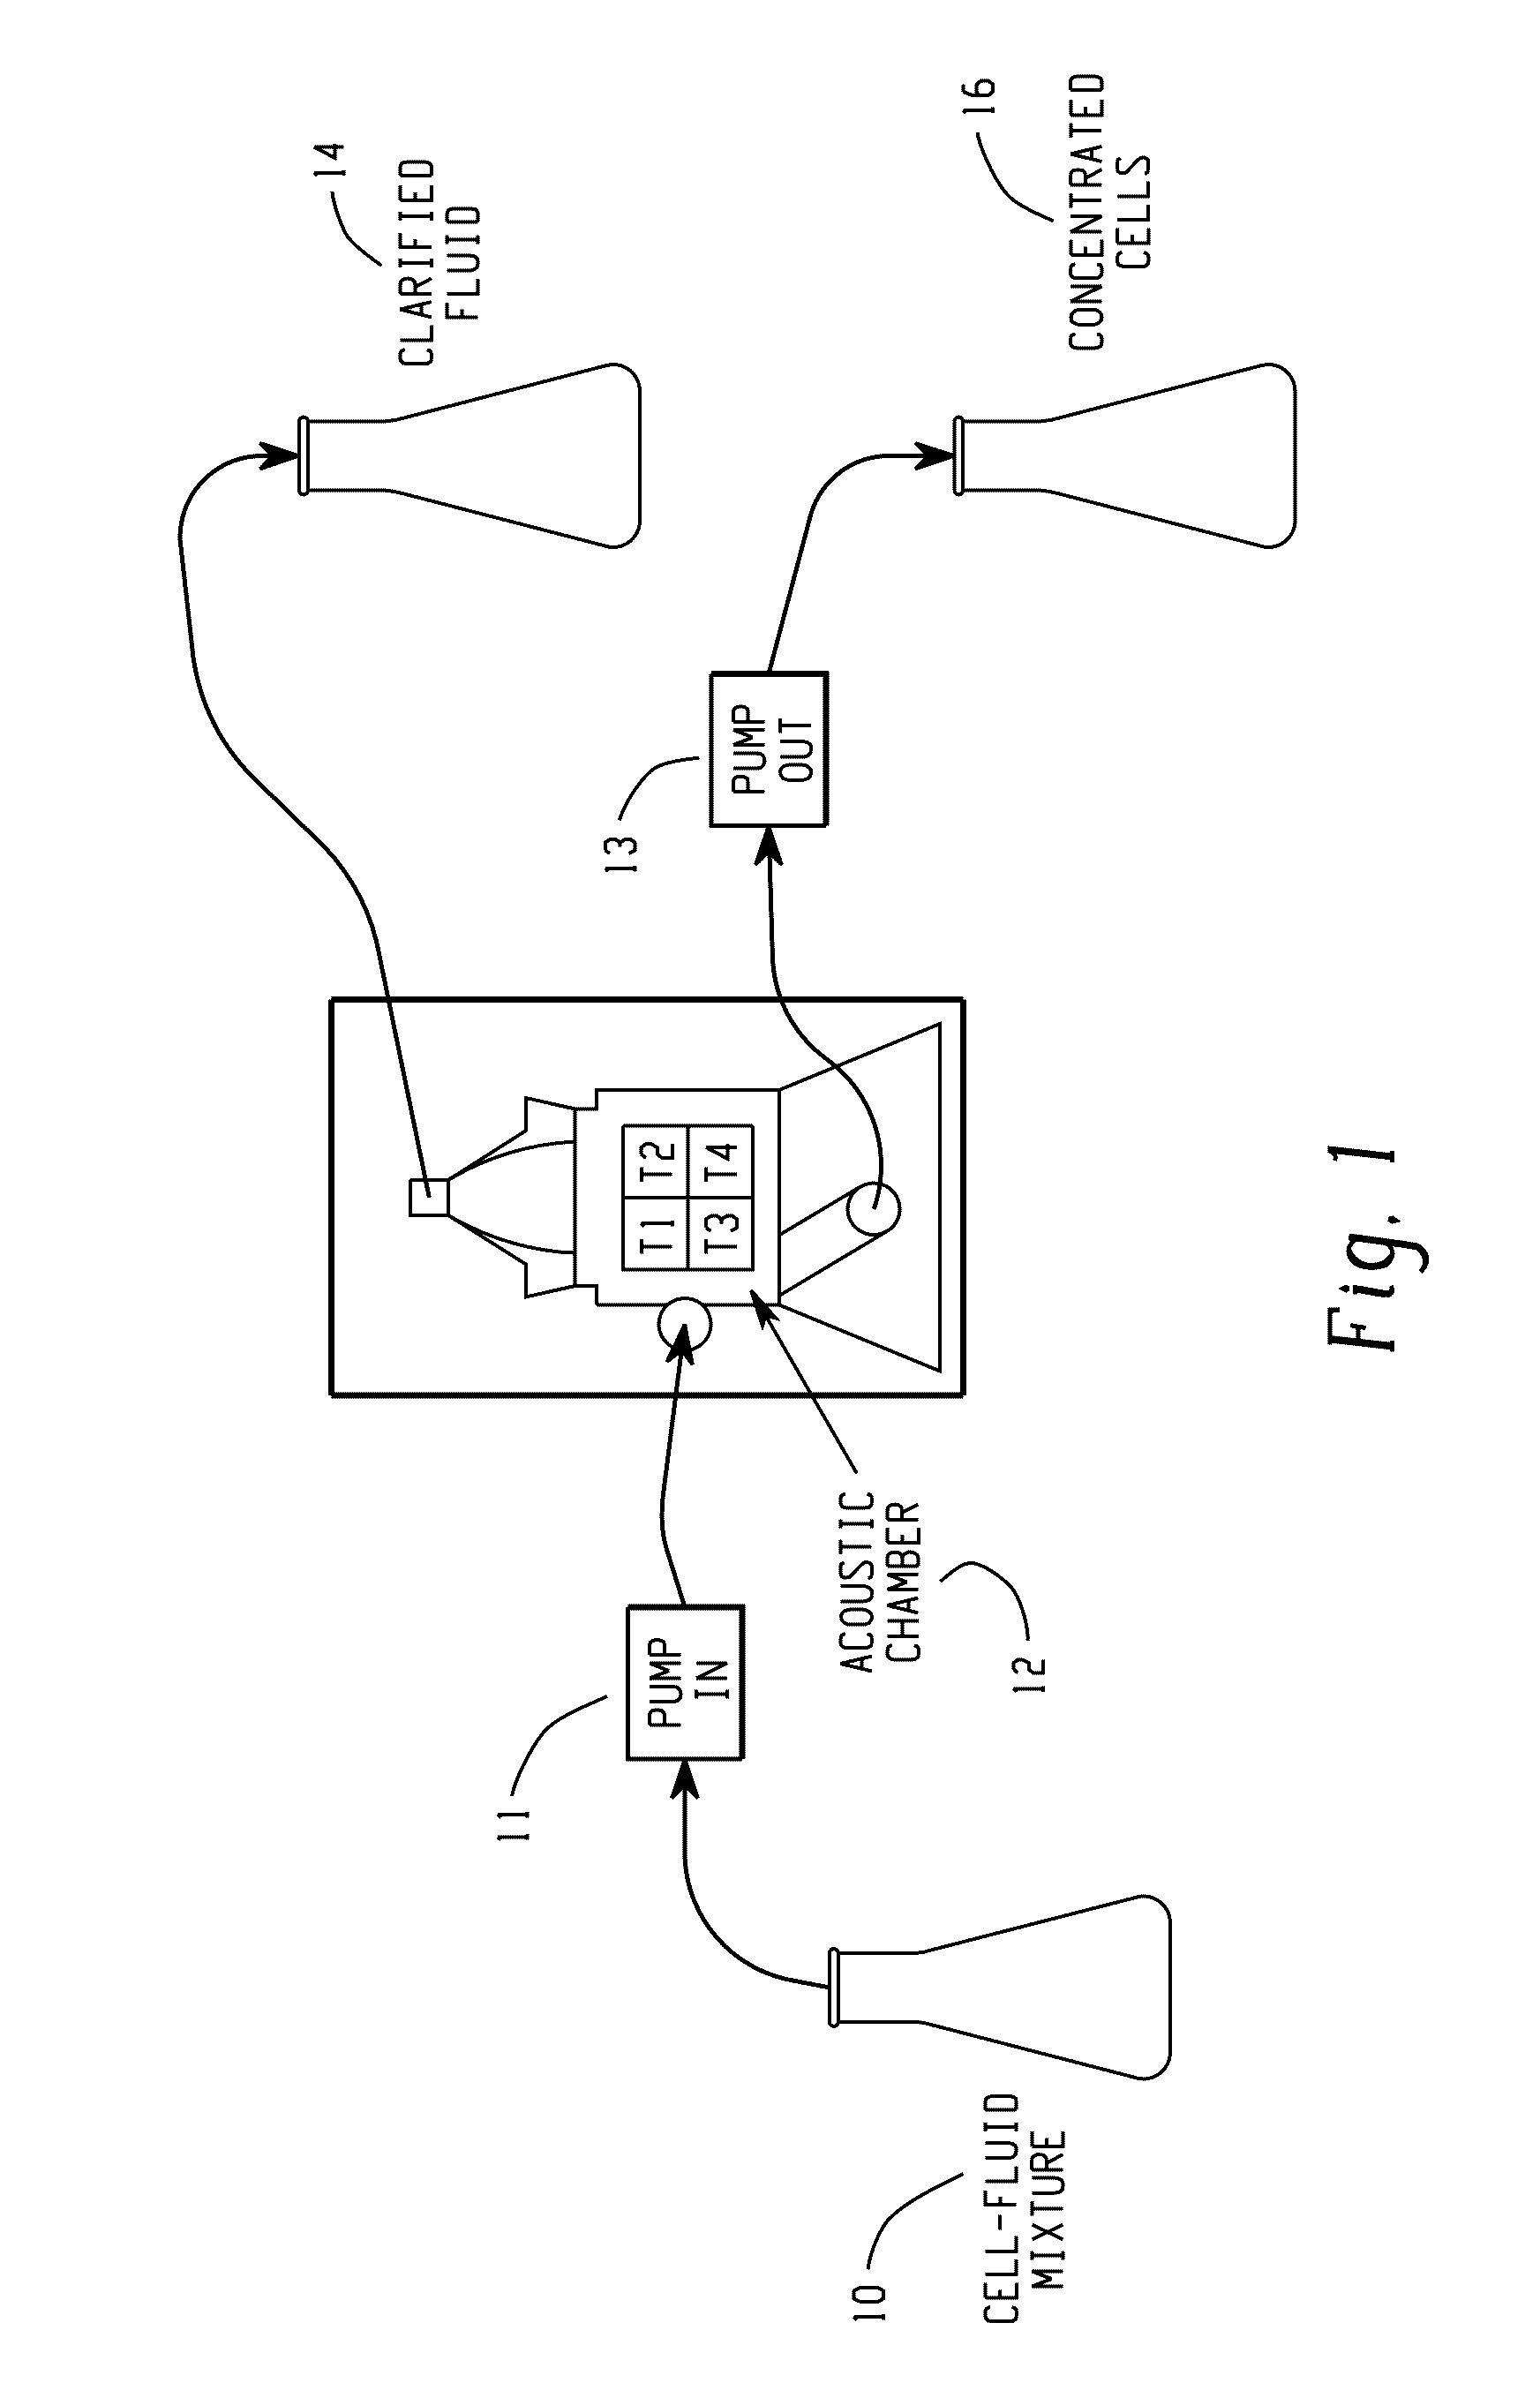 Methods and apparatus for particle aggregation using acoustic standing waves